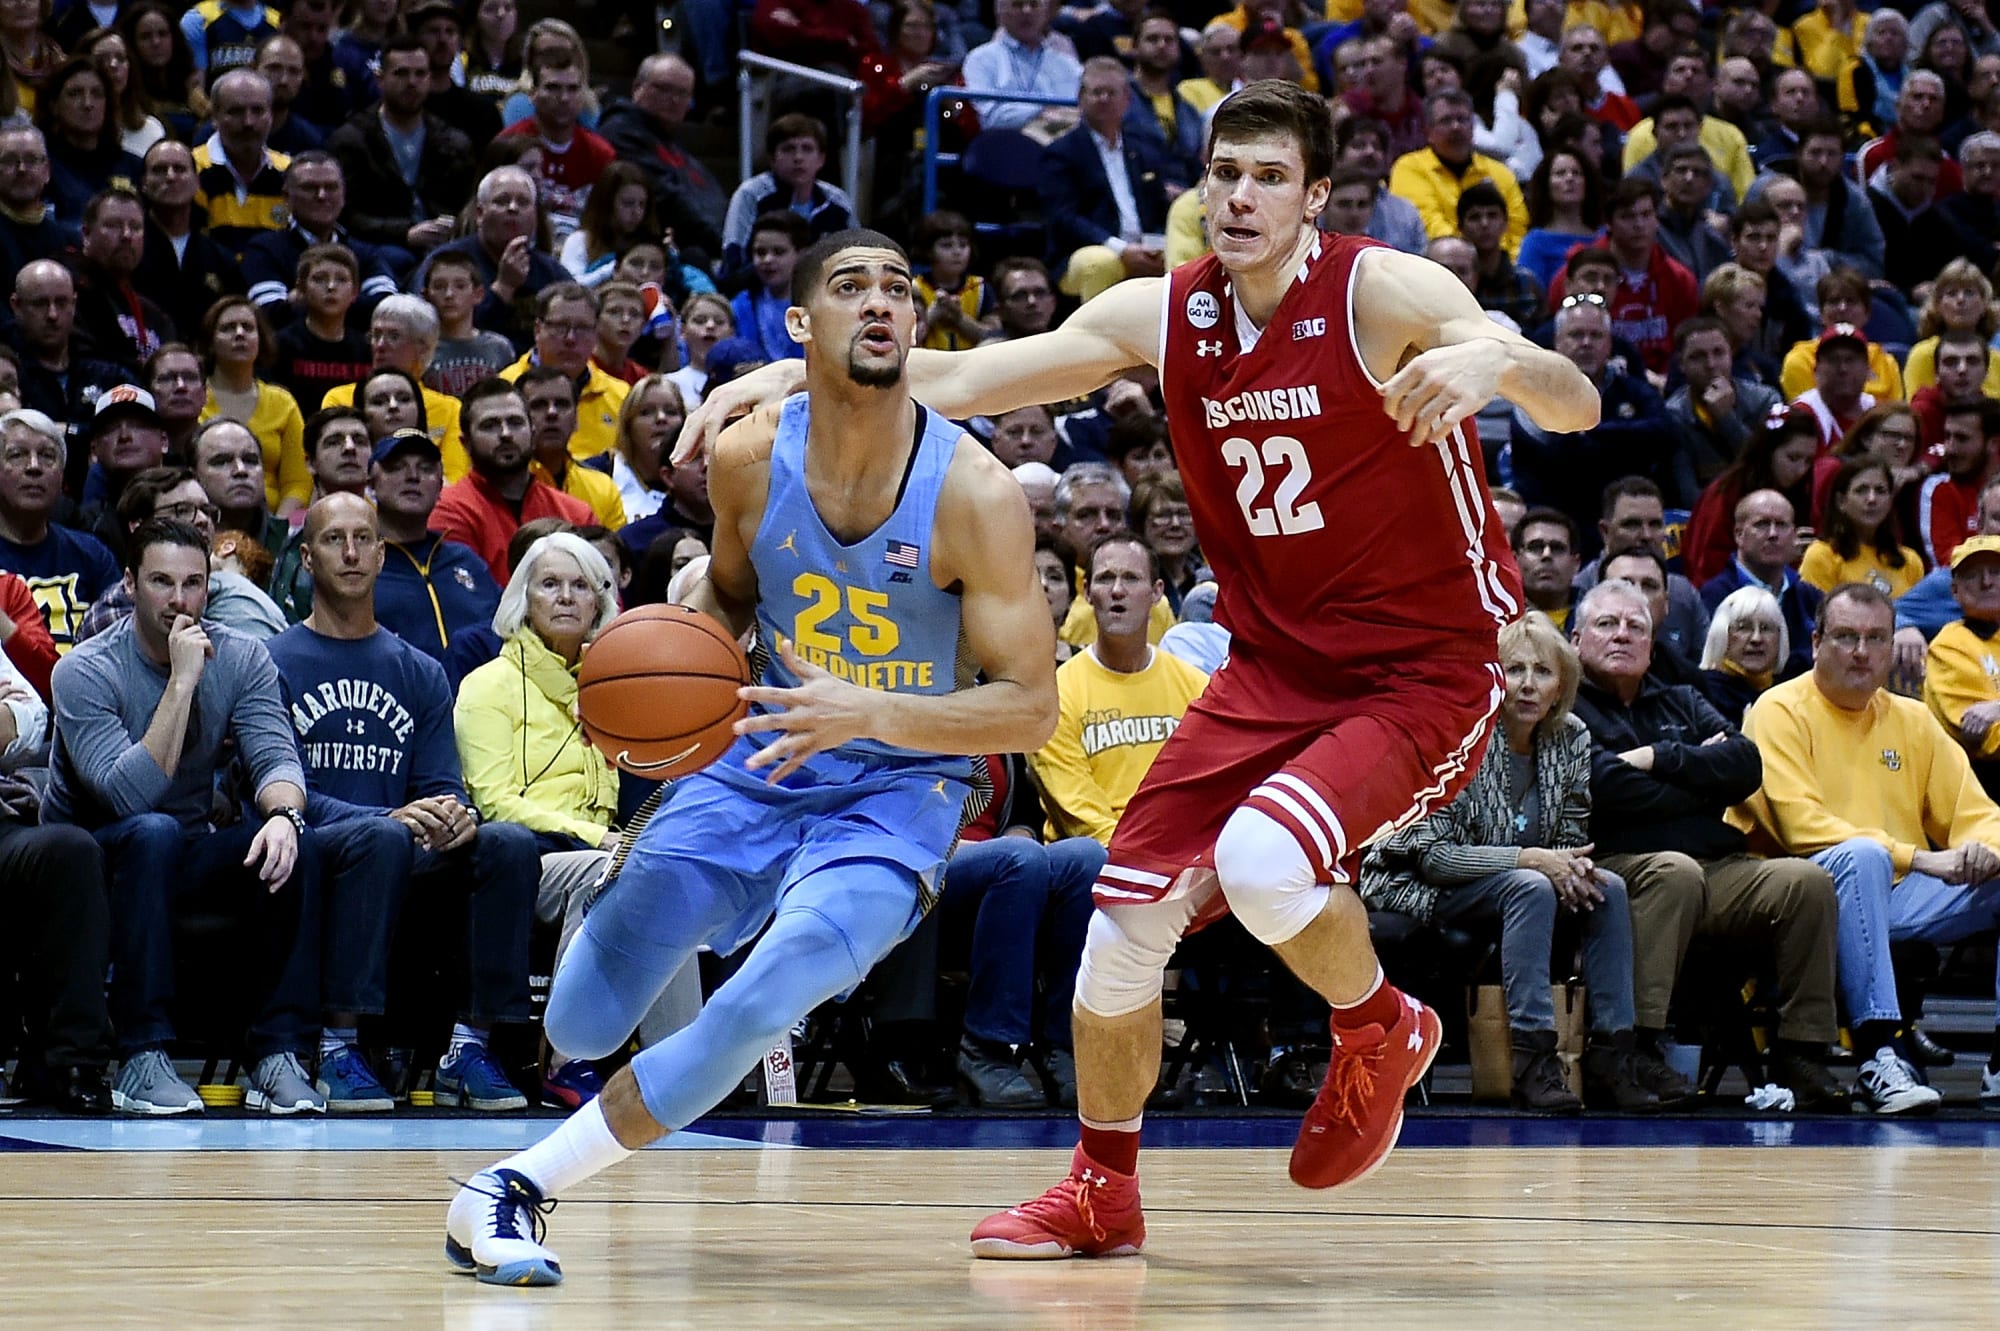 Wisconsin vs. Marquette 201819 College basketball game preview, TV